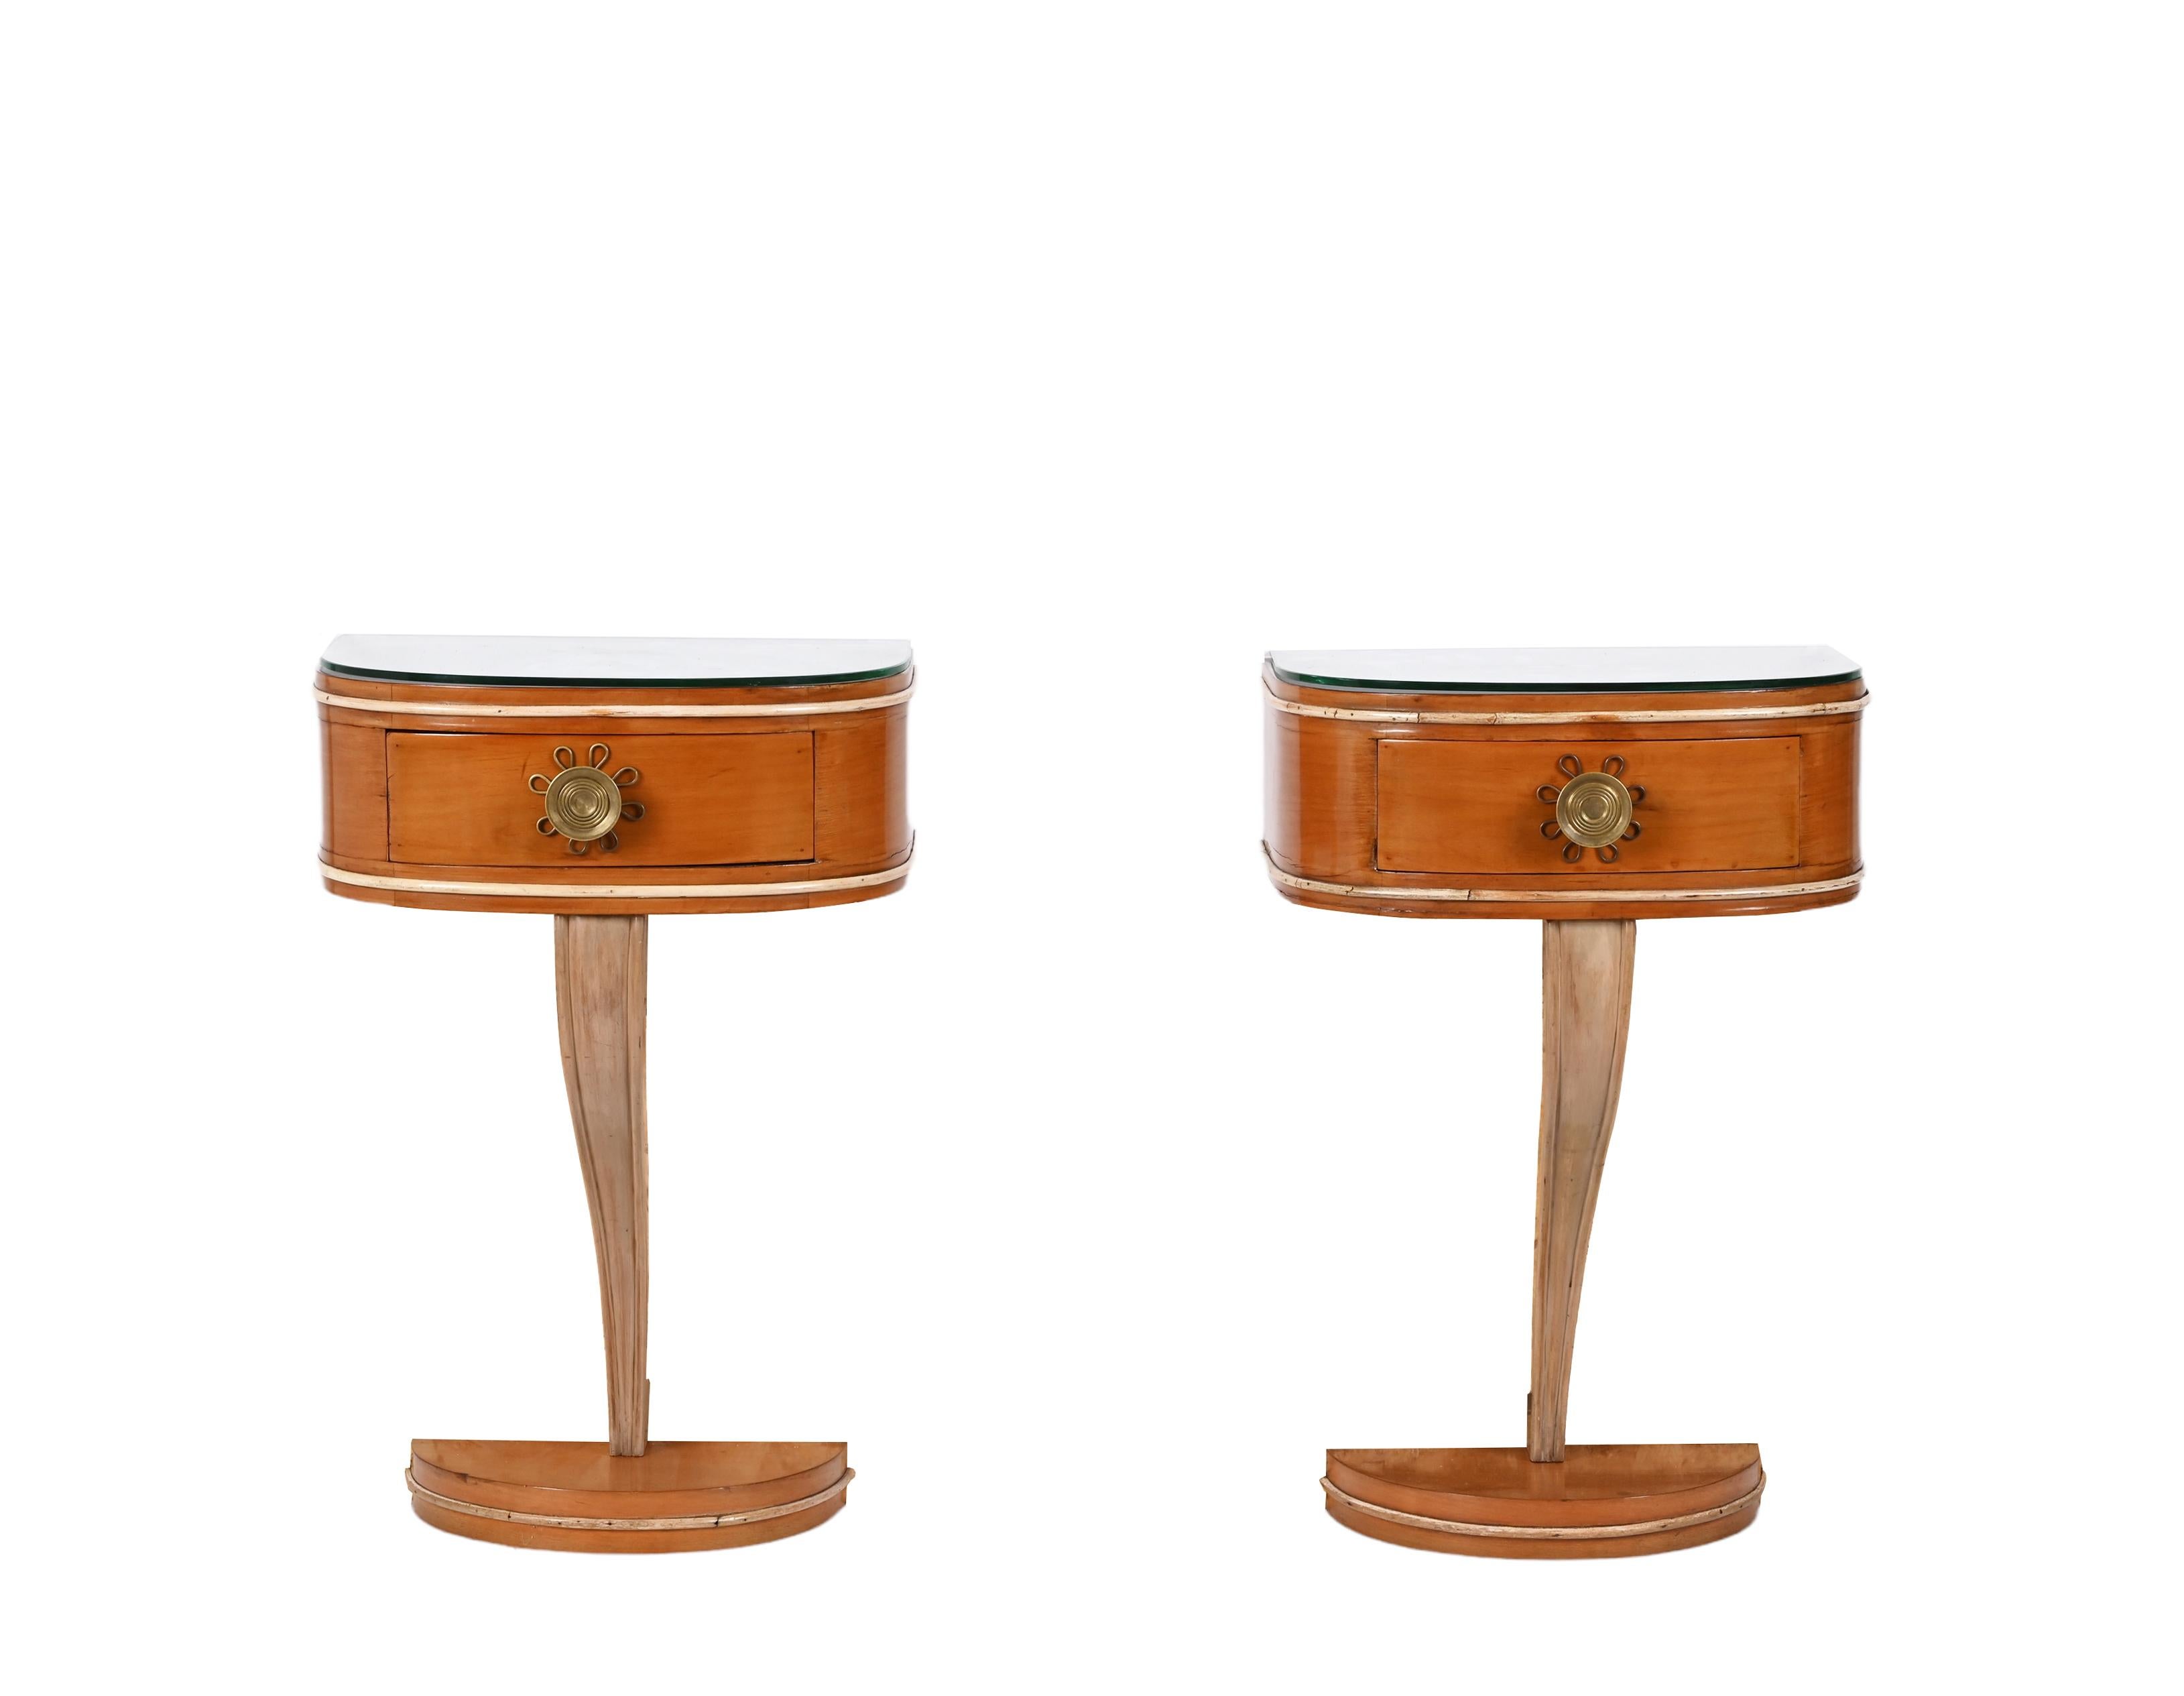 Incredible pair of Italian bedside tables by Valzania made in Italy in the 1930s. The top is made in cherry wood and connected to the bottom by a curved elegant beech wood piece. The top is covered with a glass with stunning brass handles and maple